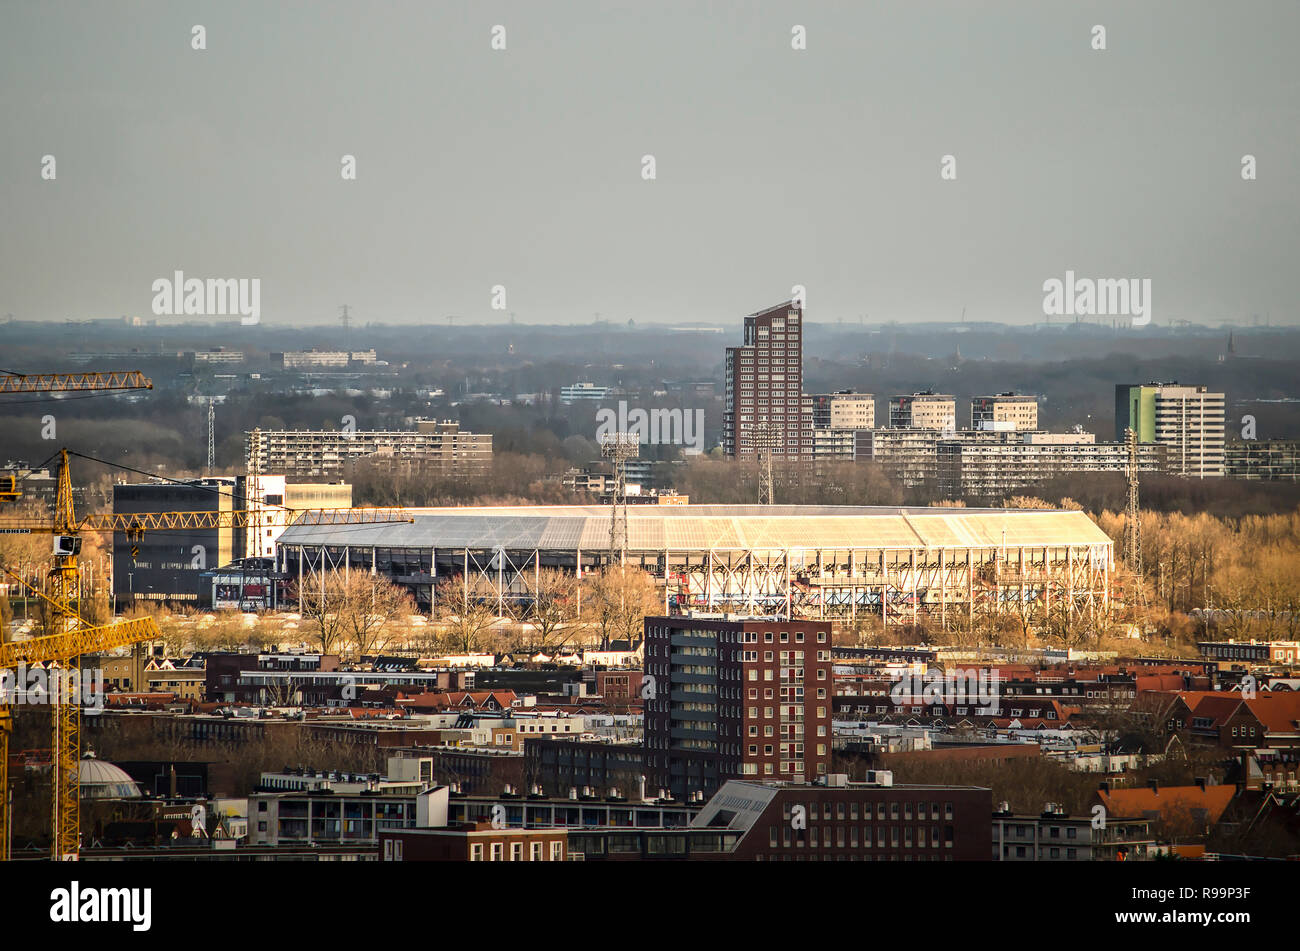 Rotterdam, The Netherlands, December 10, 2018: long distance aerial view of legendary stadium De Kuip, home of football Feyenoord, surrounded by mainl Stock Photo